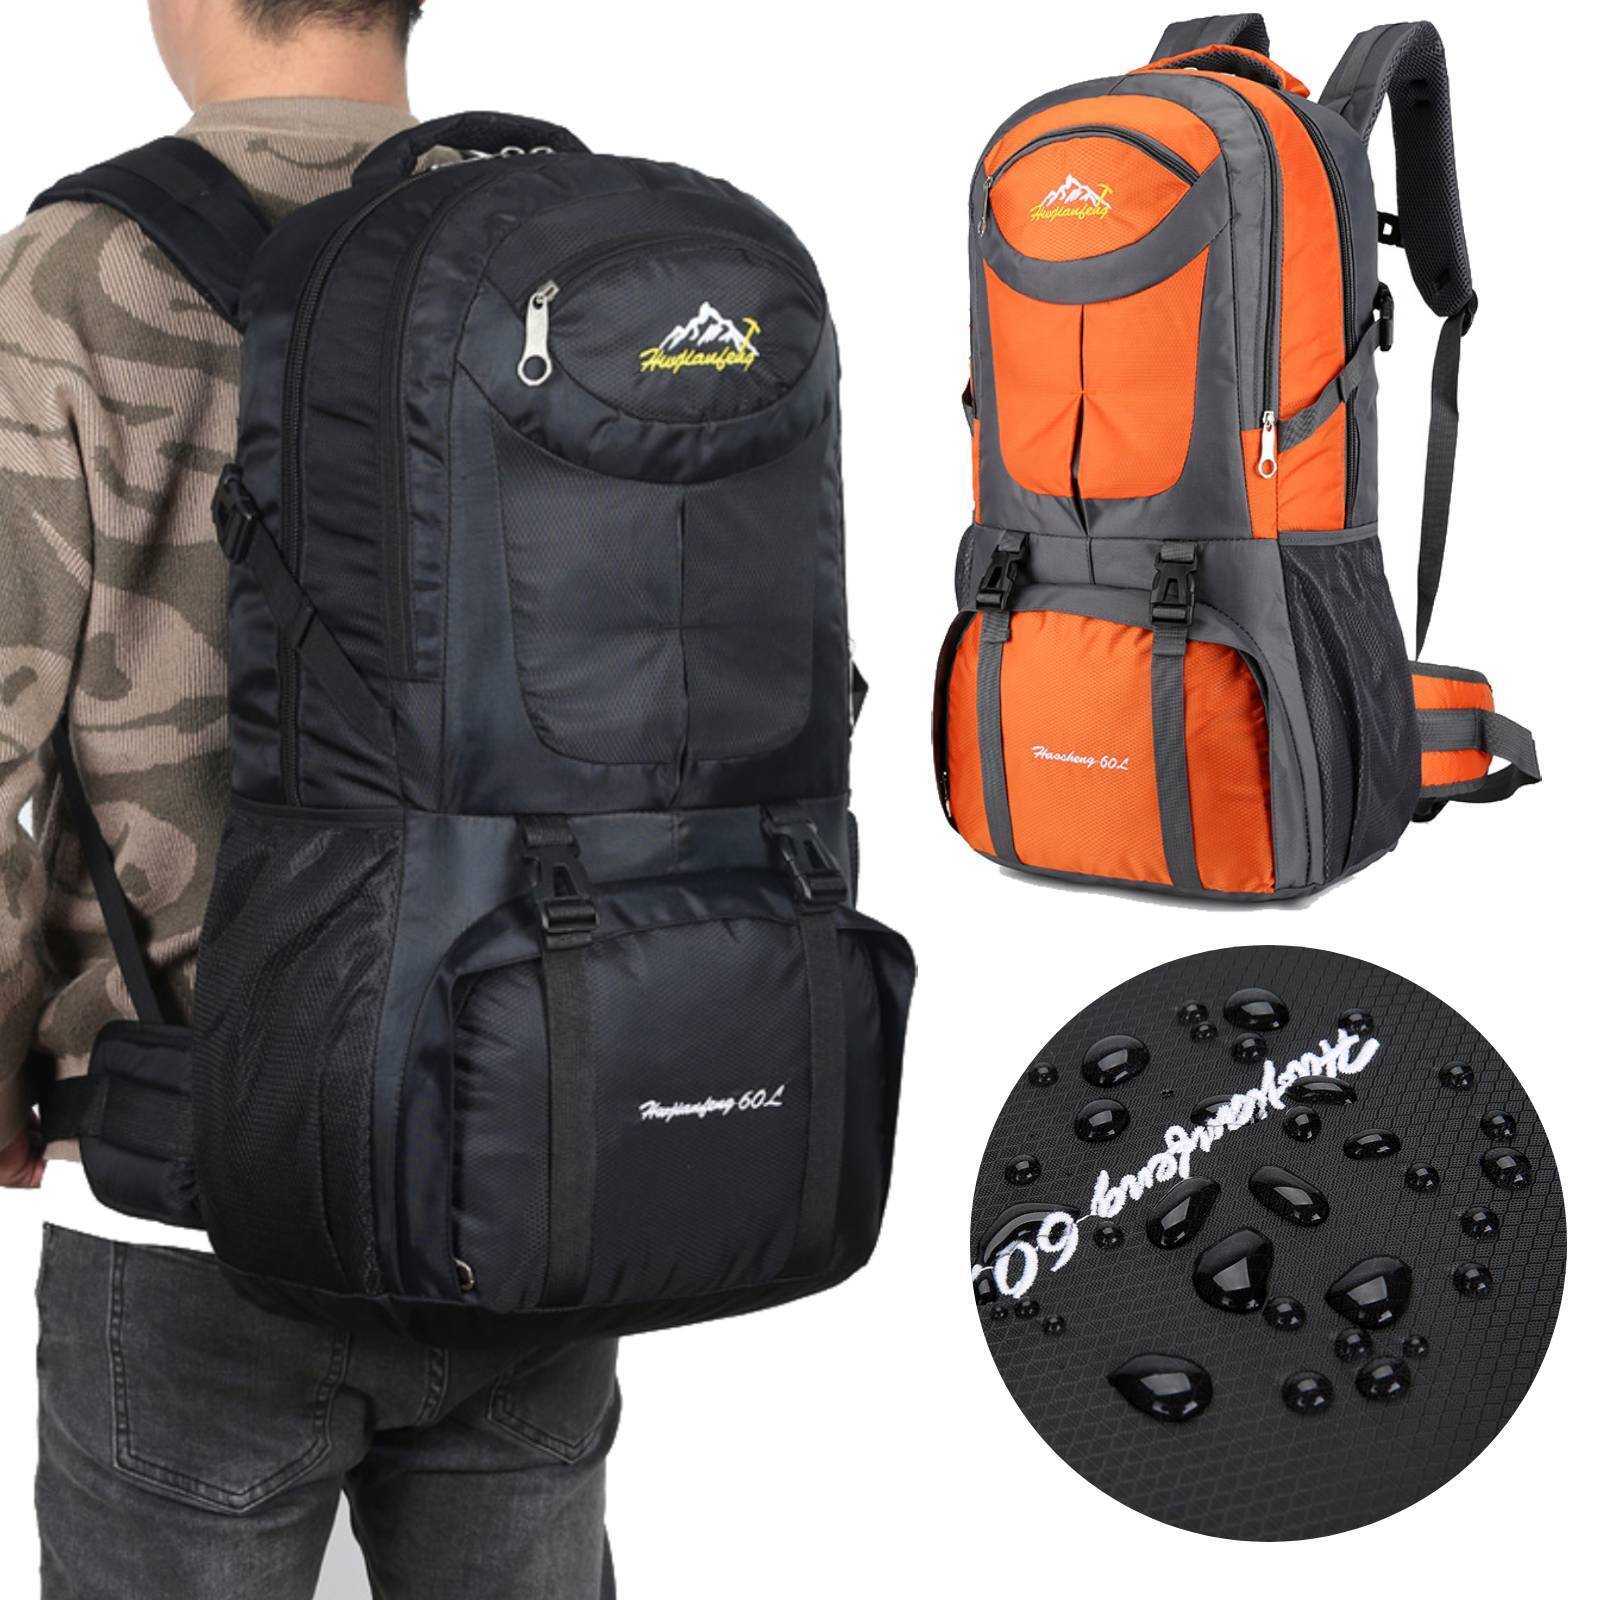 Small Backpacks for Hiking